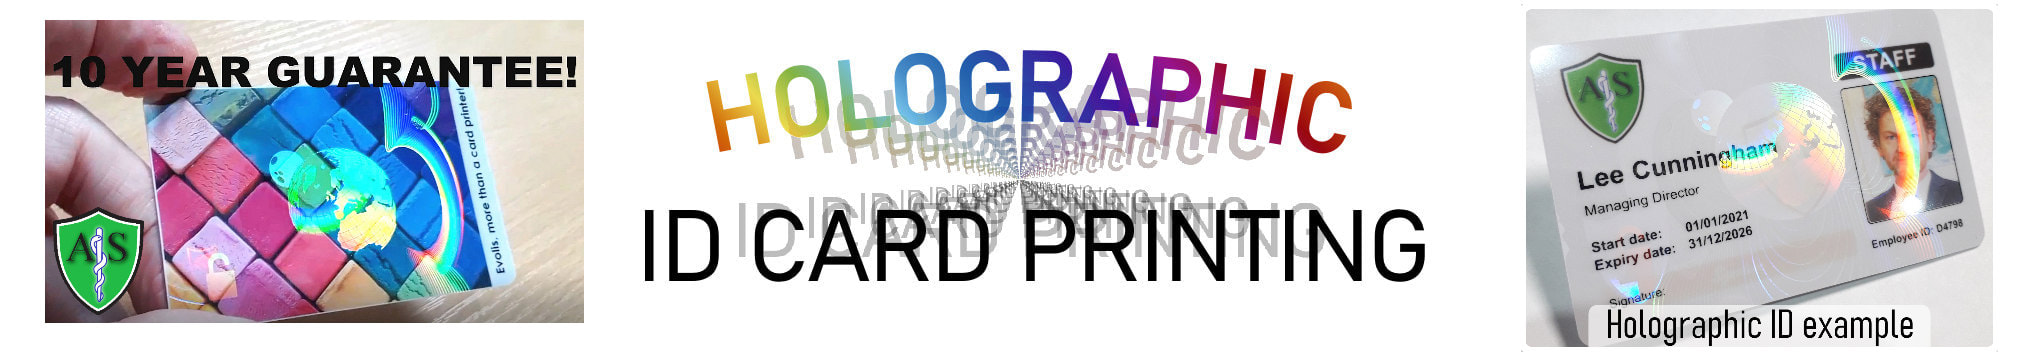 Luton plastic holographic ID card print service. Employee Identity cards with hologram or holograph security mark.